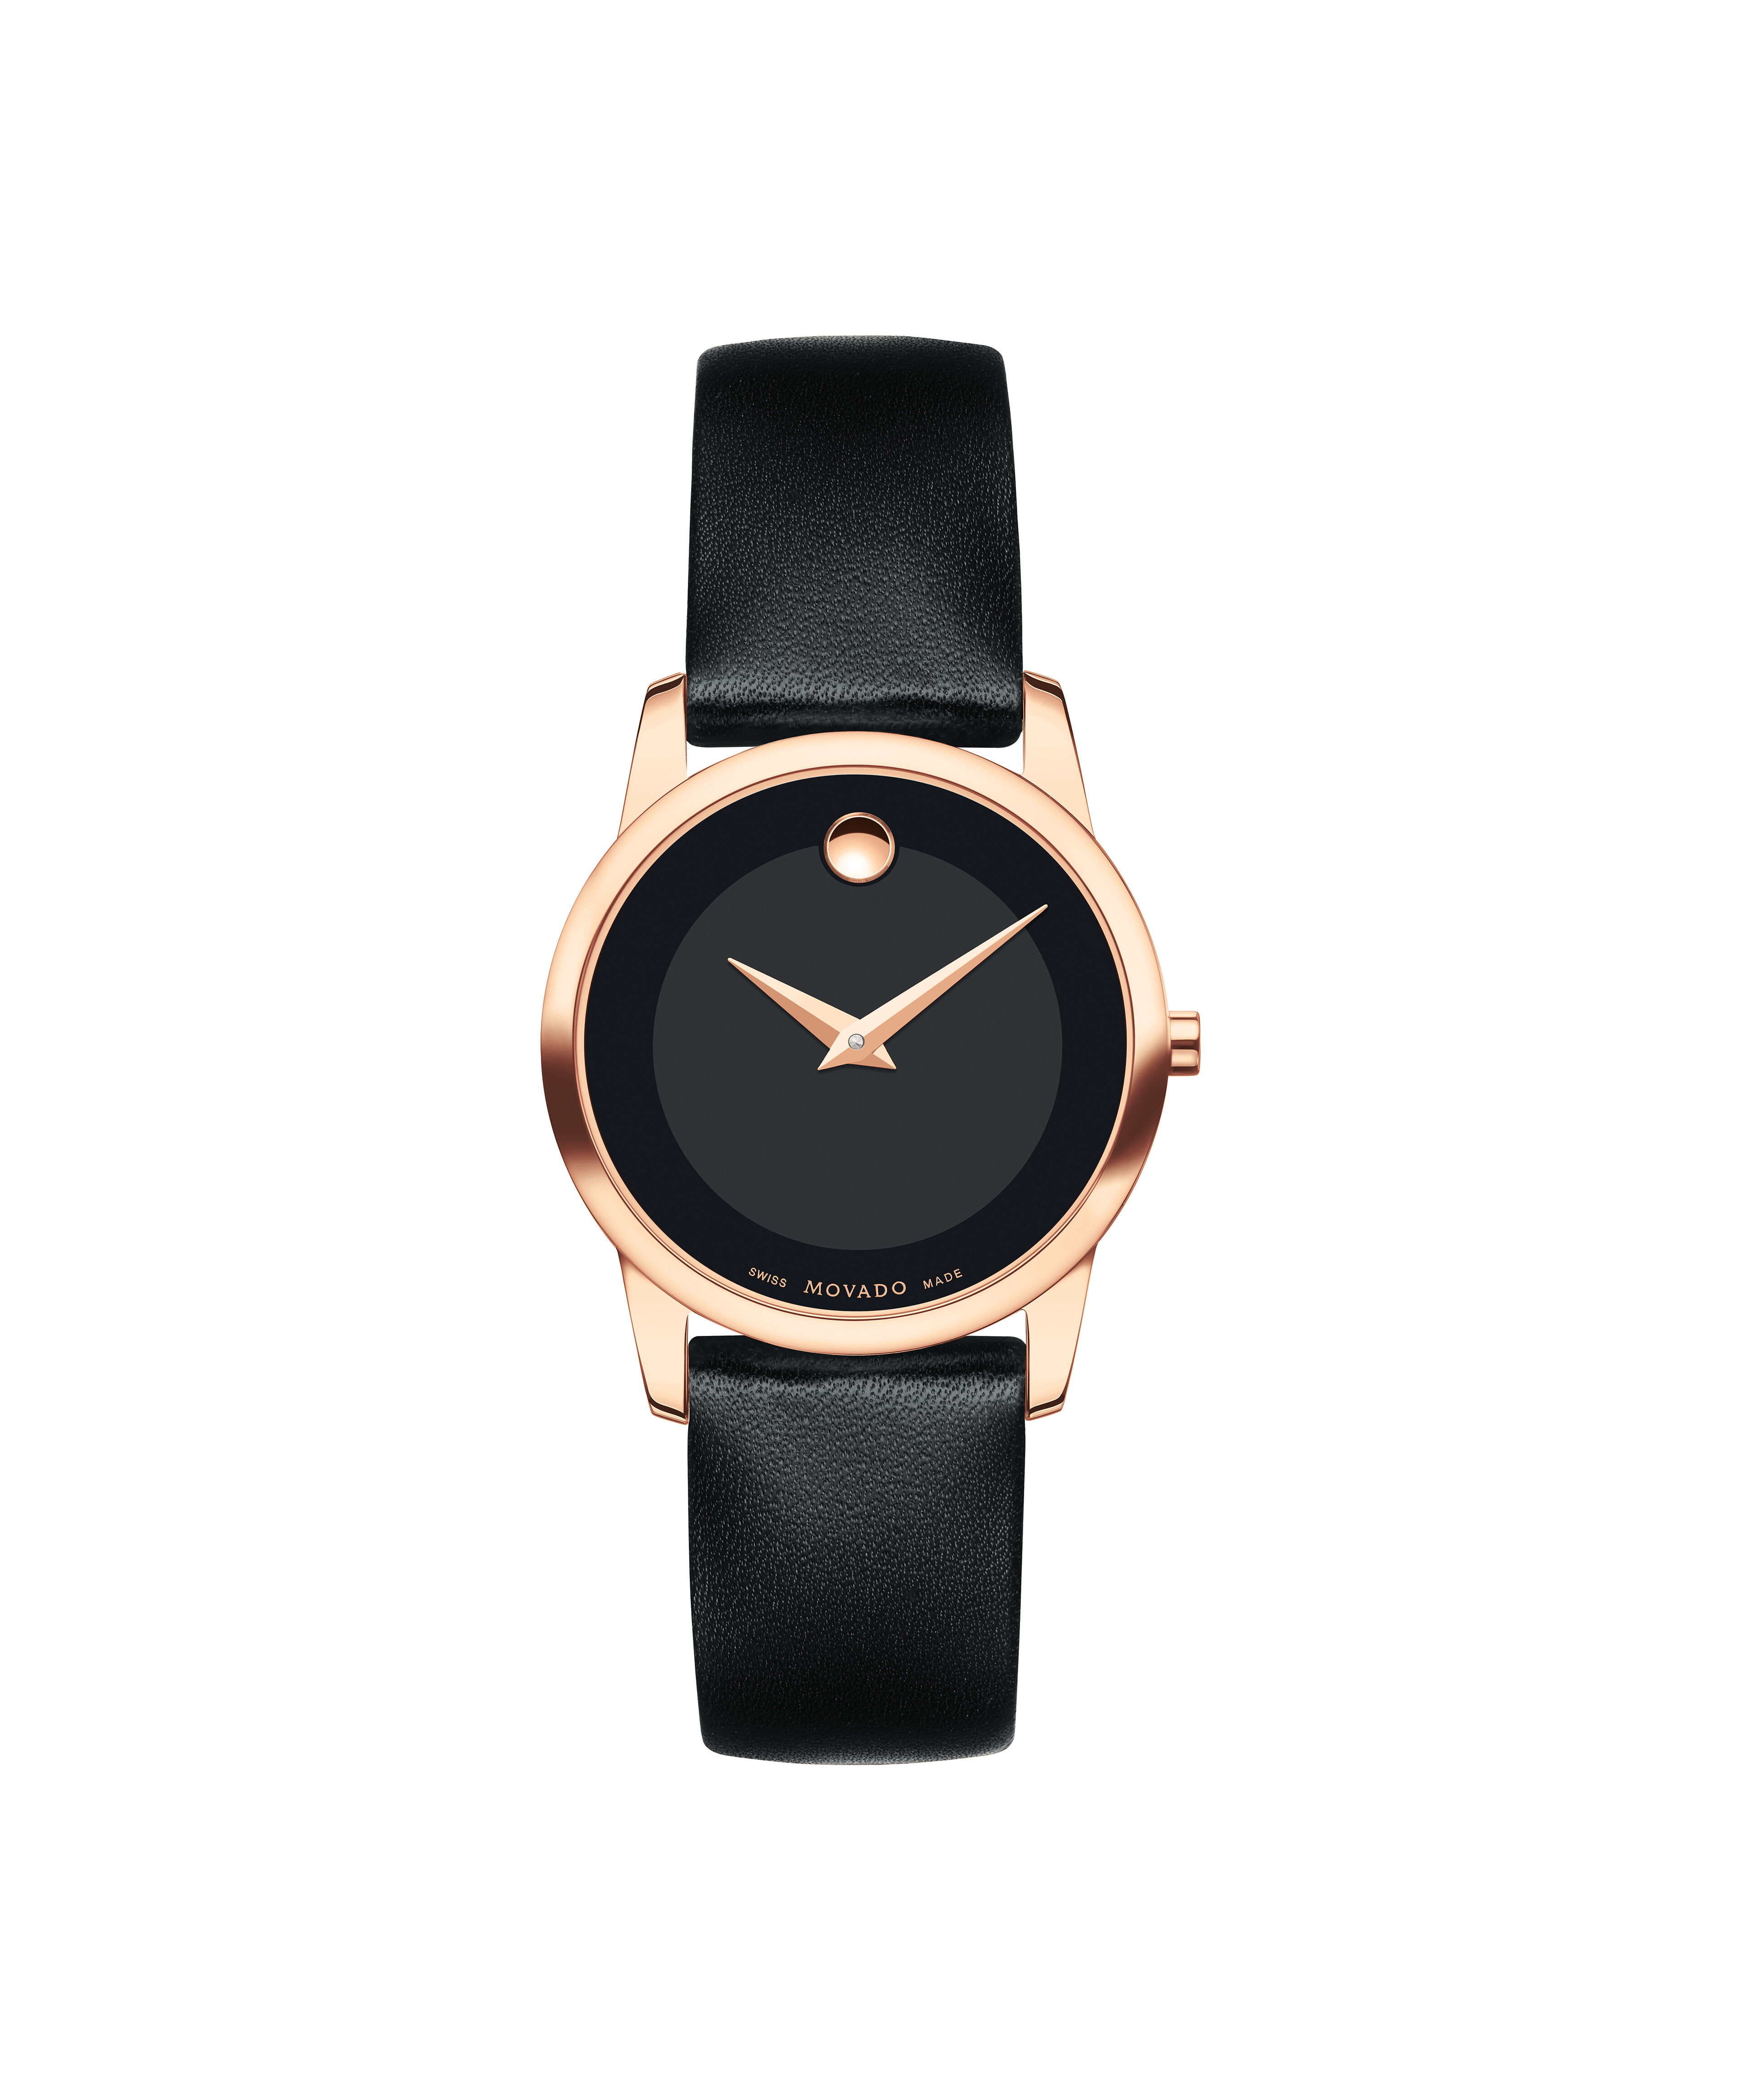 Movado Museum Classic Steel/Gold 35 mm. Ref. 8I A2 890.I